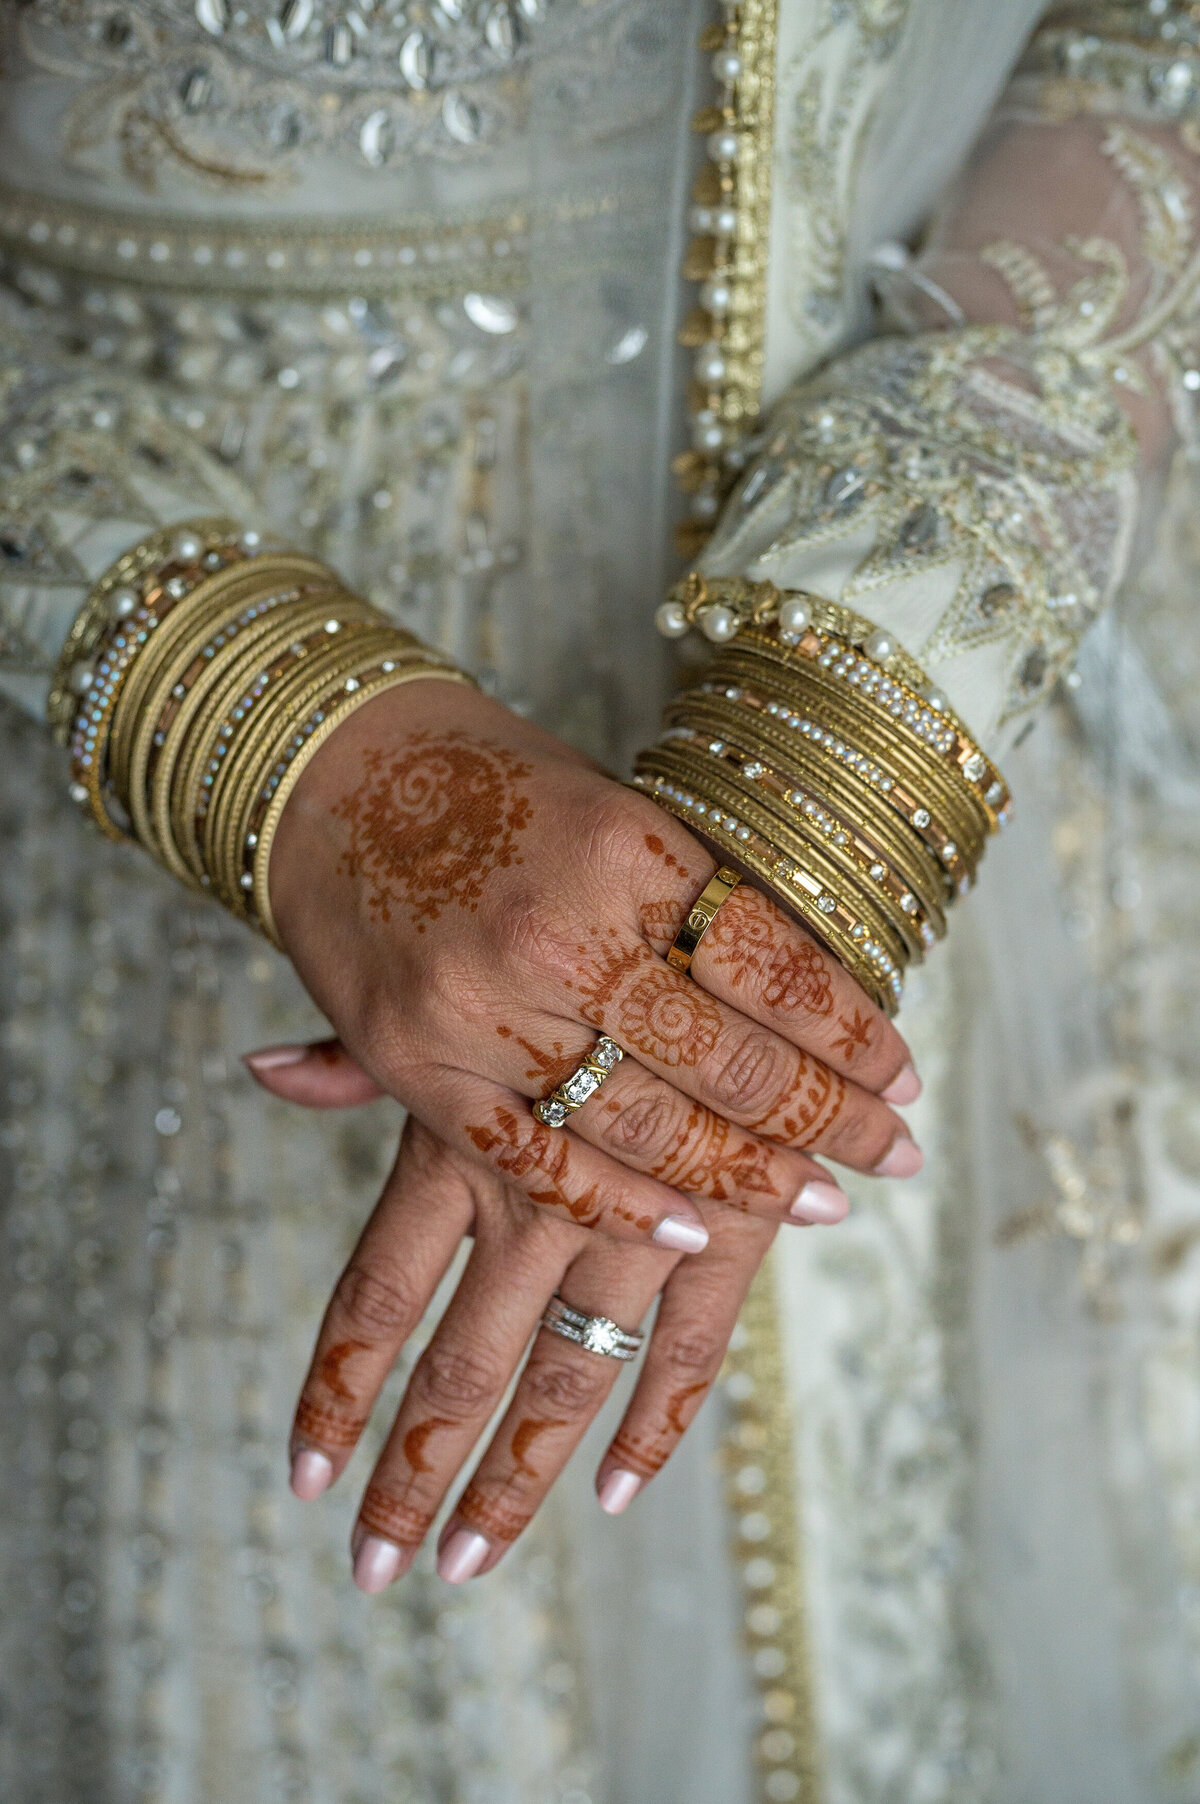 Brides hands with jewelry.